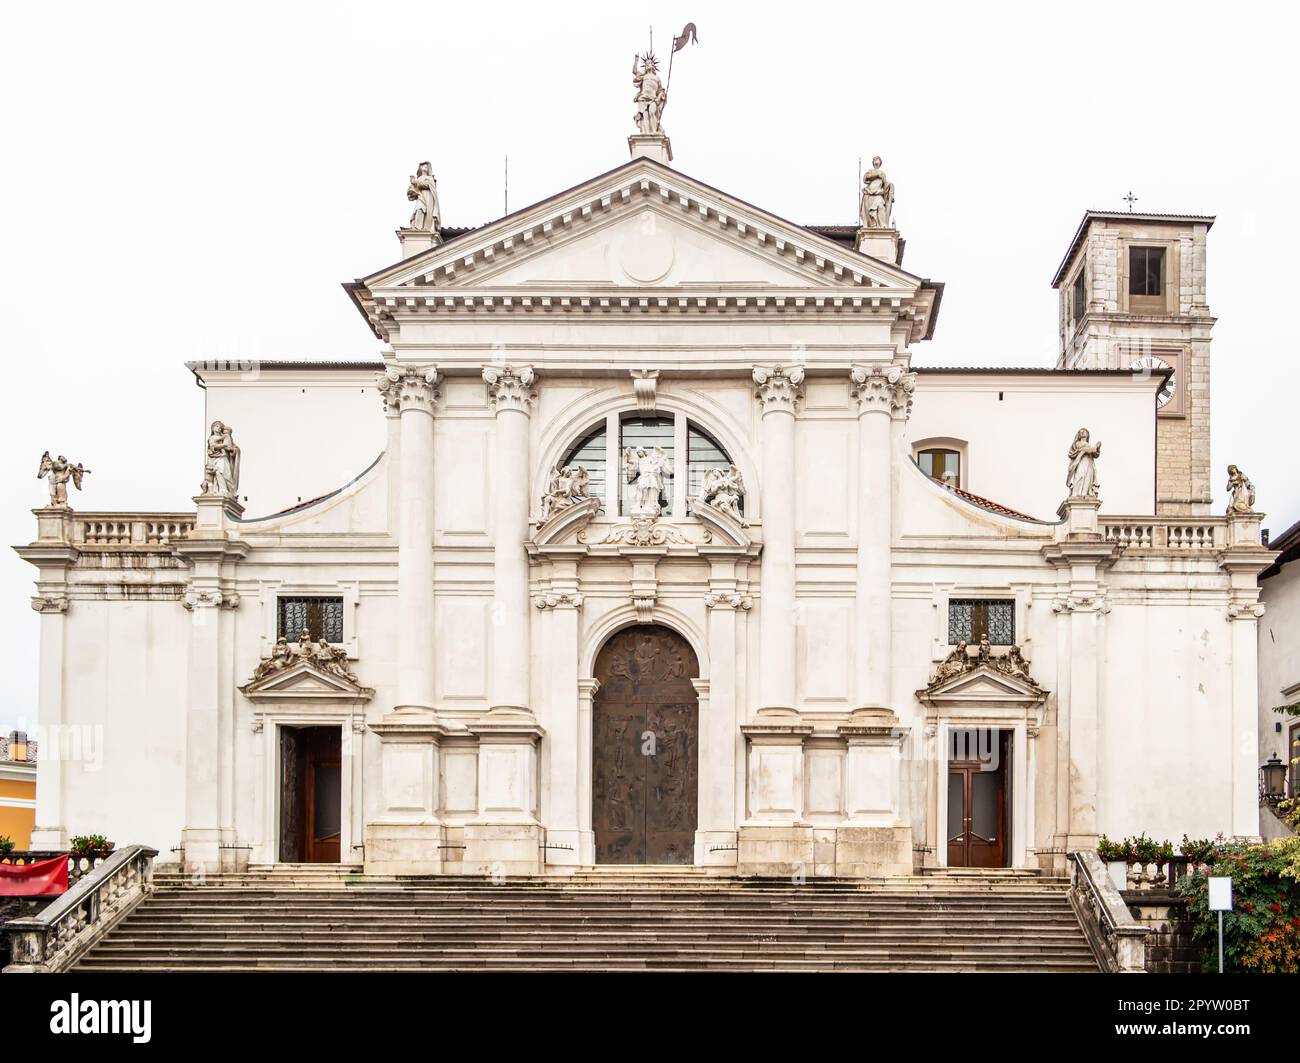 View of the Cathedral of San Daniele del Friuli, Italy Stock Photo